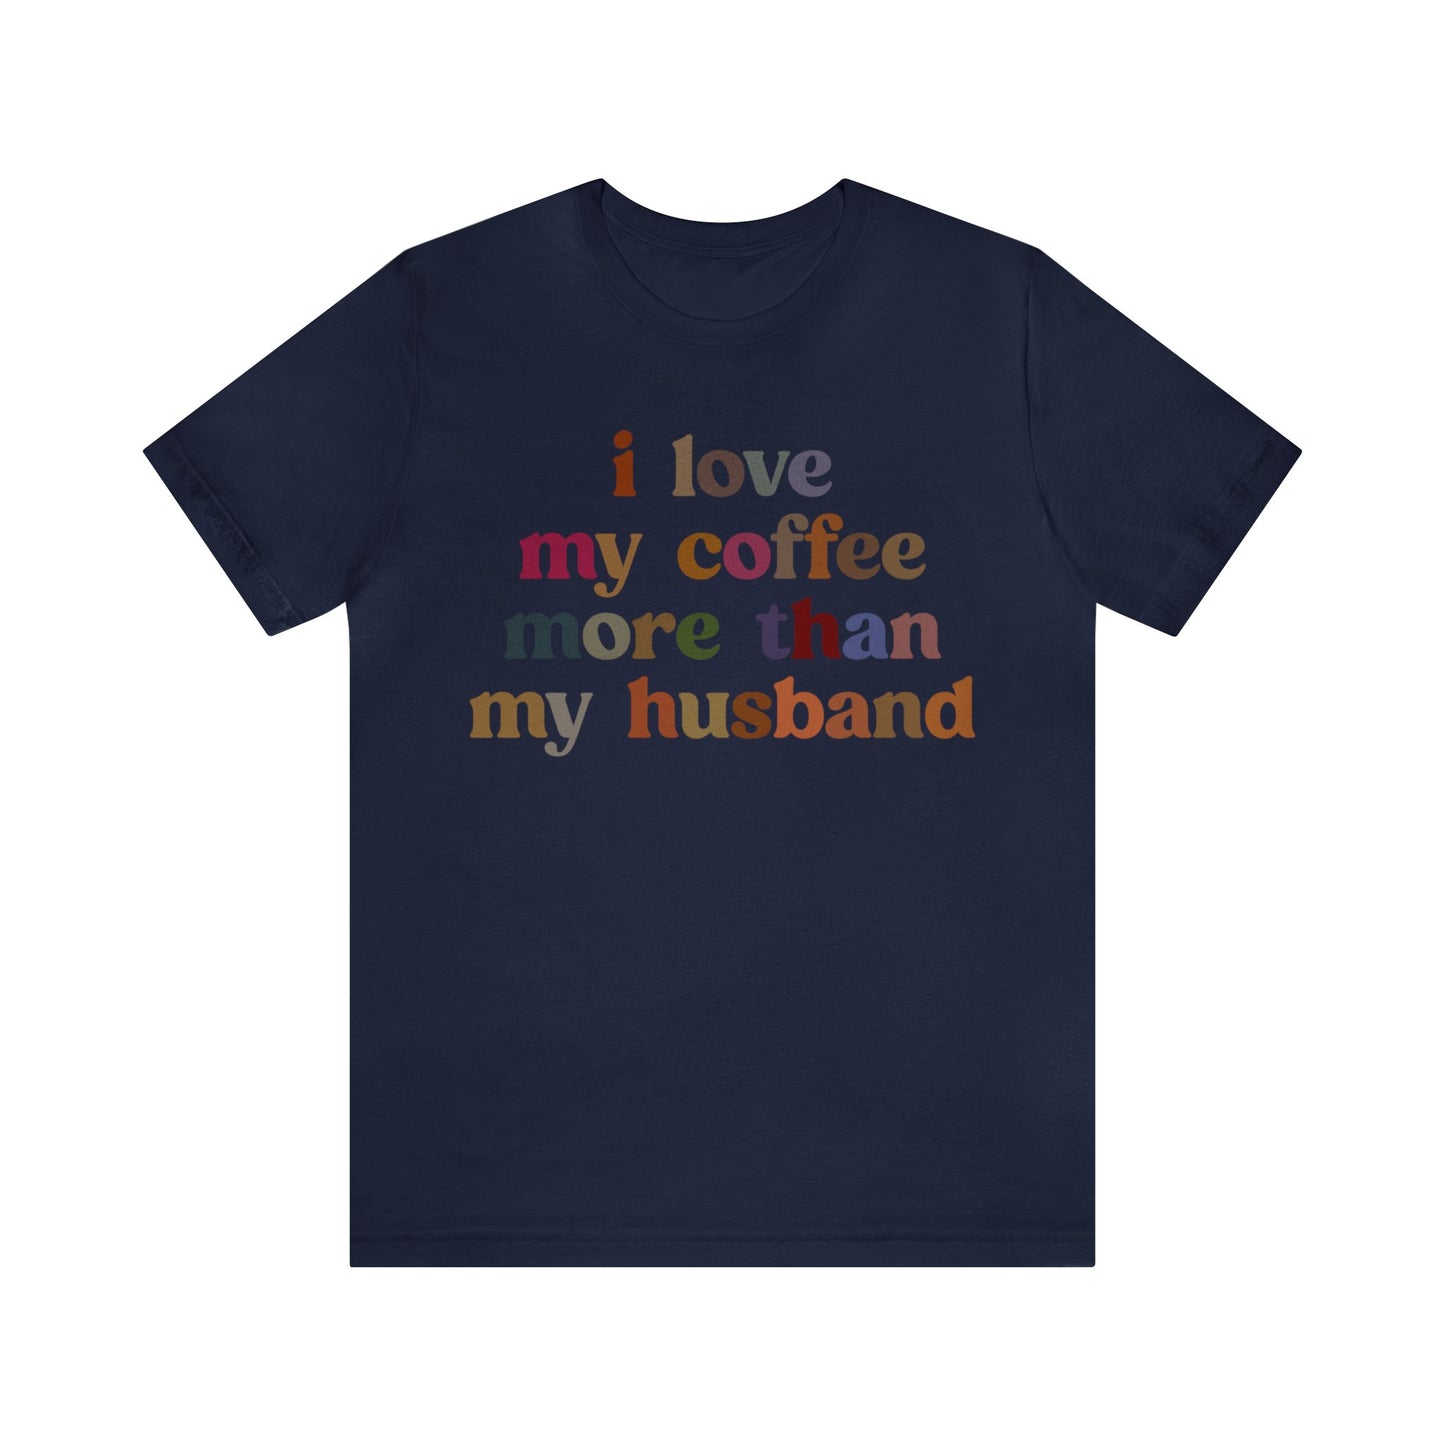 I Love My Coffee More Than My Husband Shirt, Funny Coffee Shirt, Husband Gift, Gift For Husband, Gift for lover Coffee, T1439